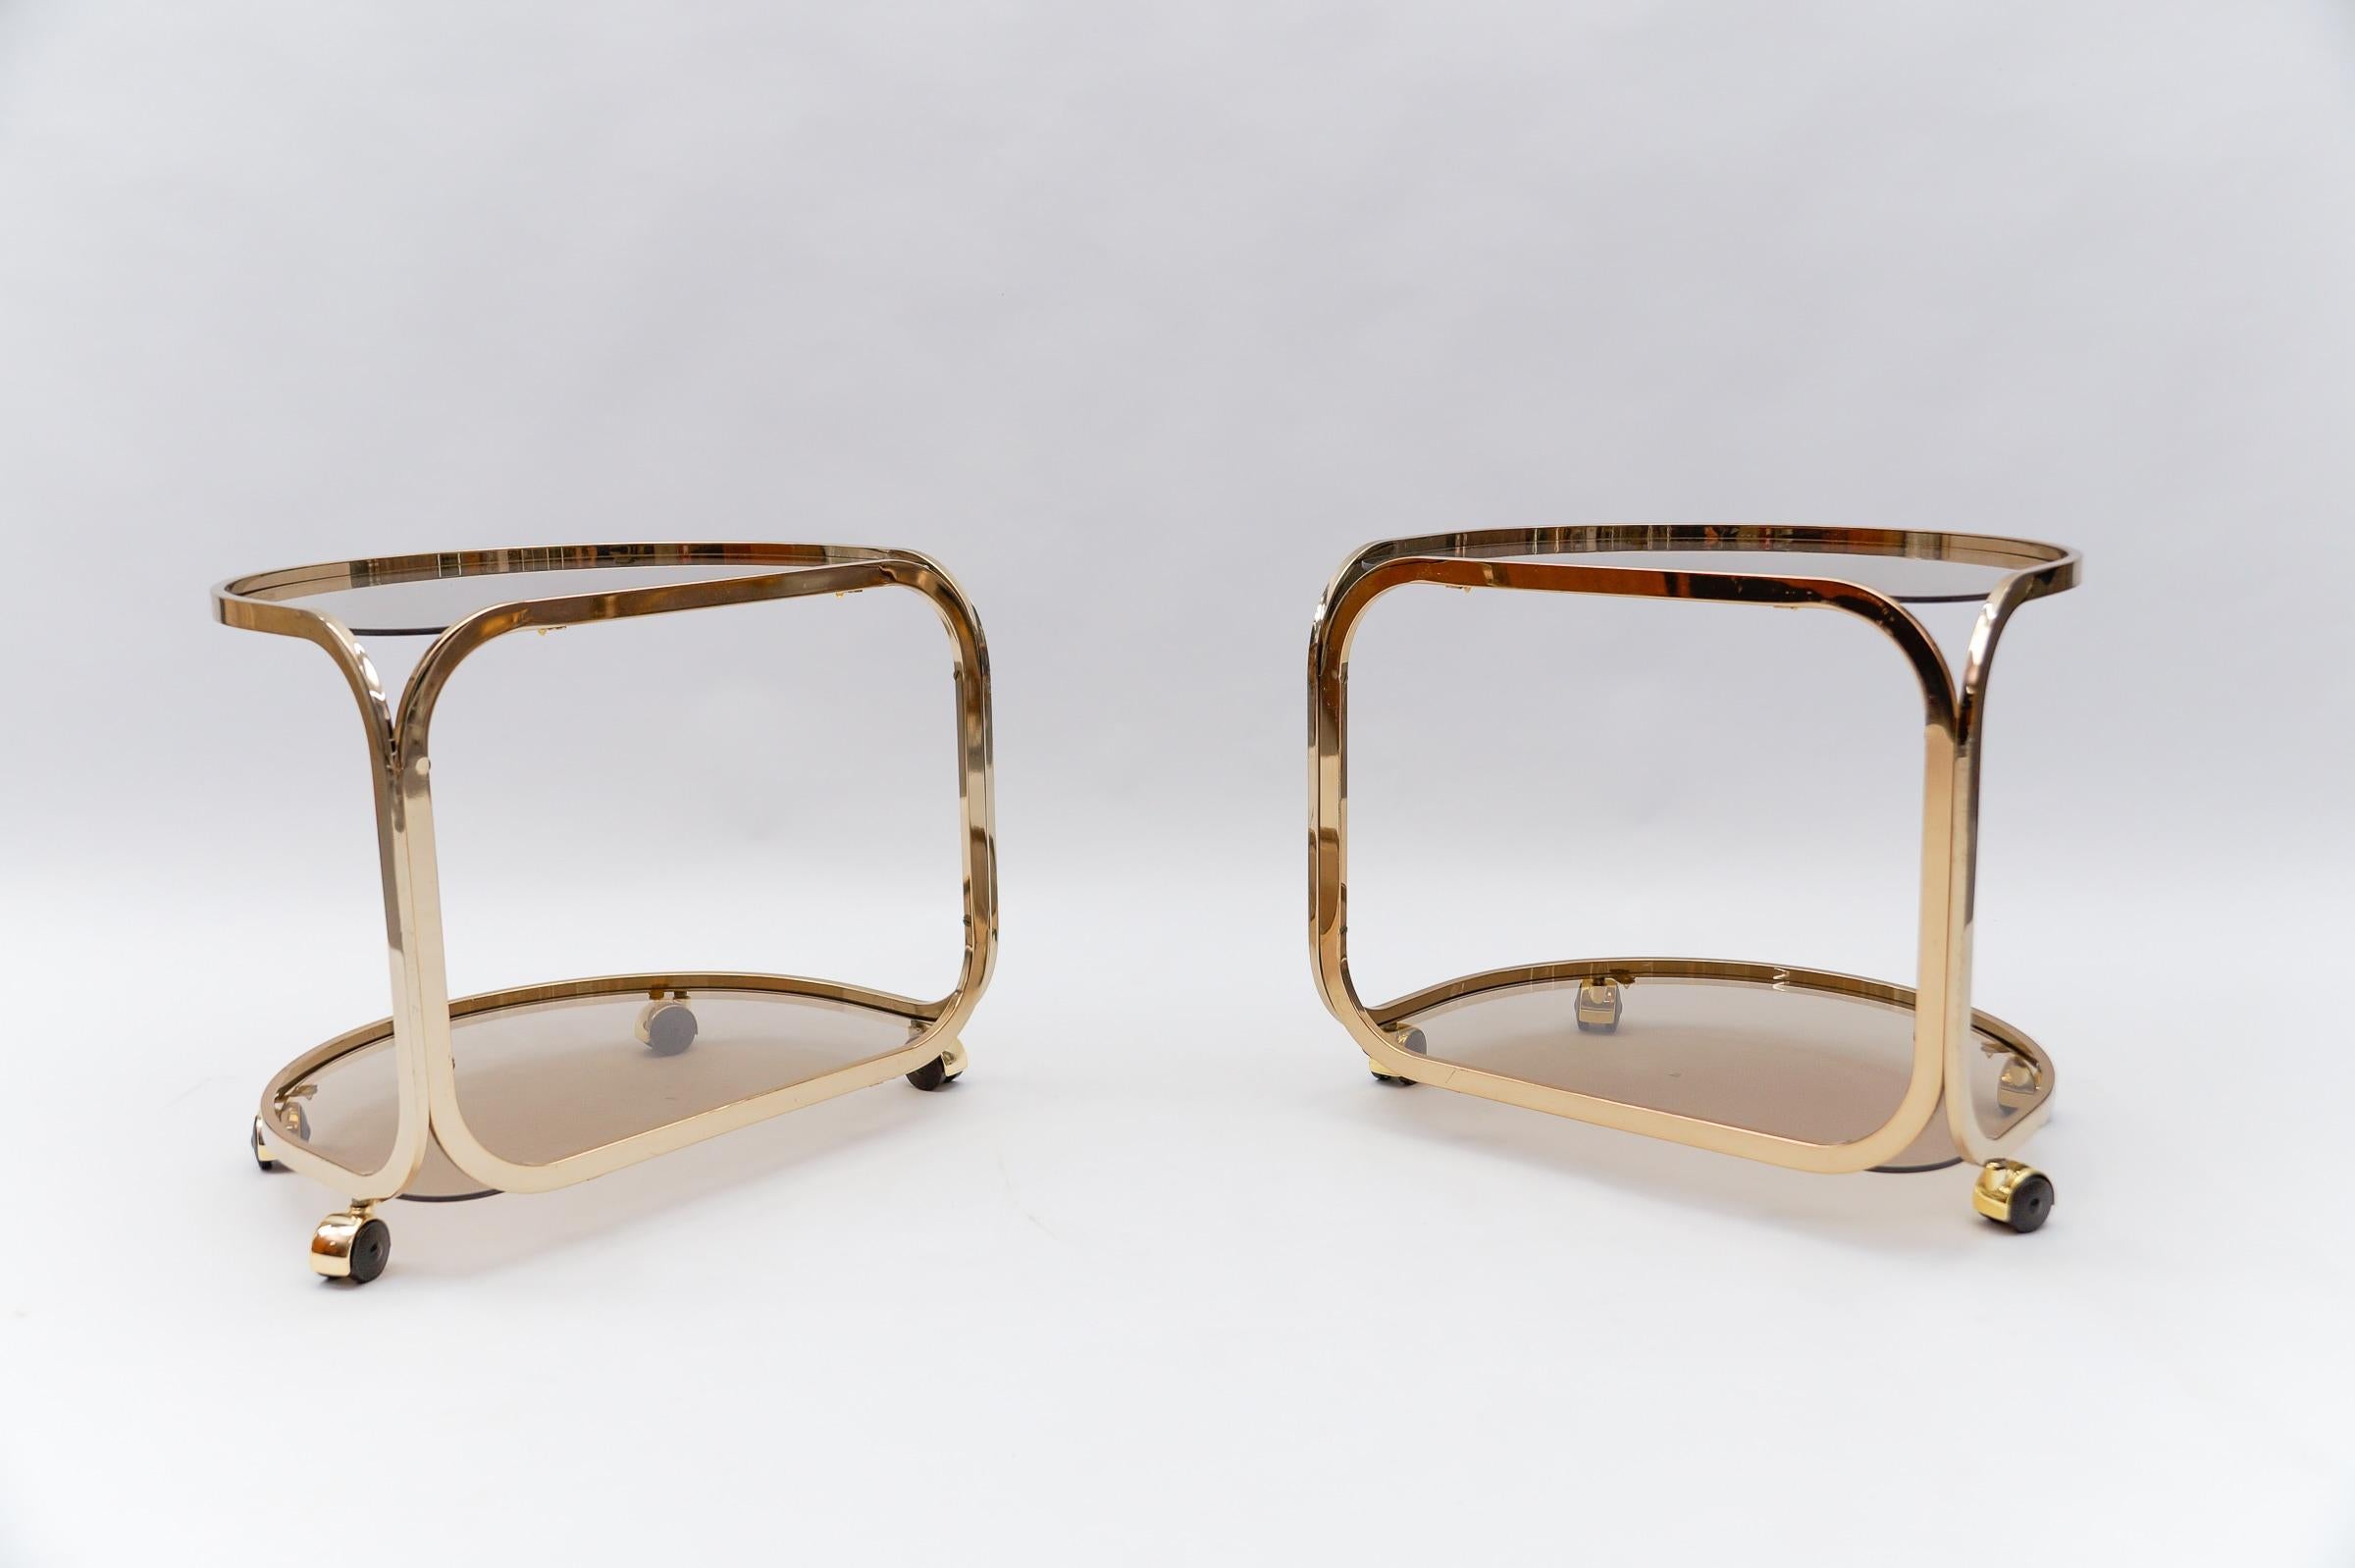 Brass Pair of French Mid-Century Modern Side Tables, 1960s For Sale